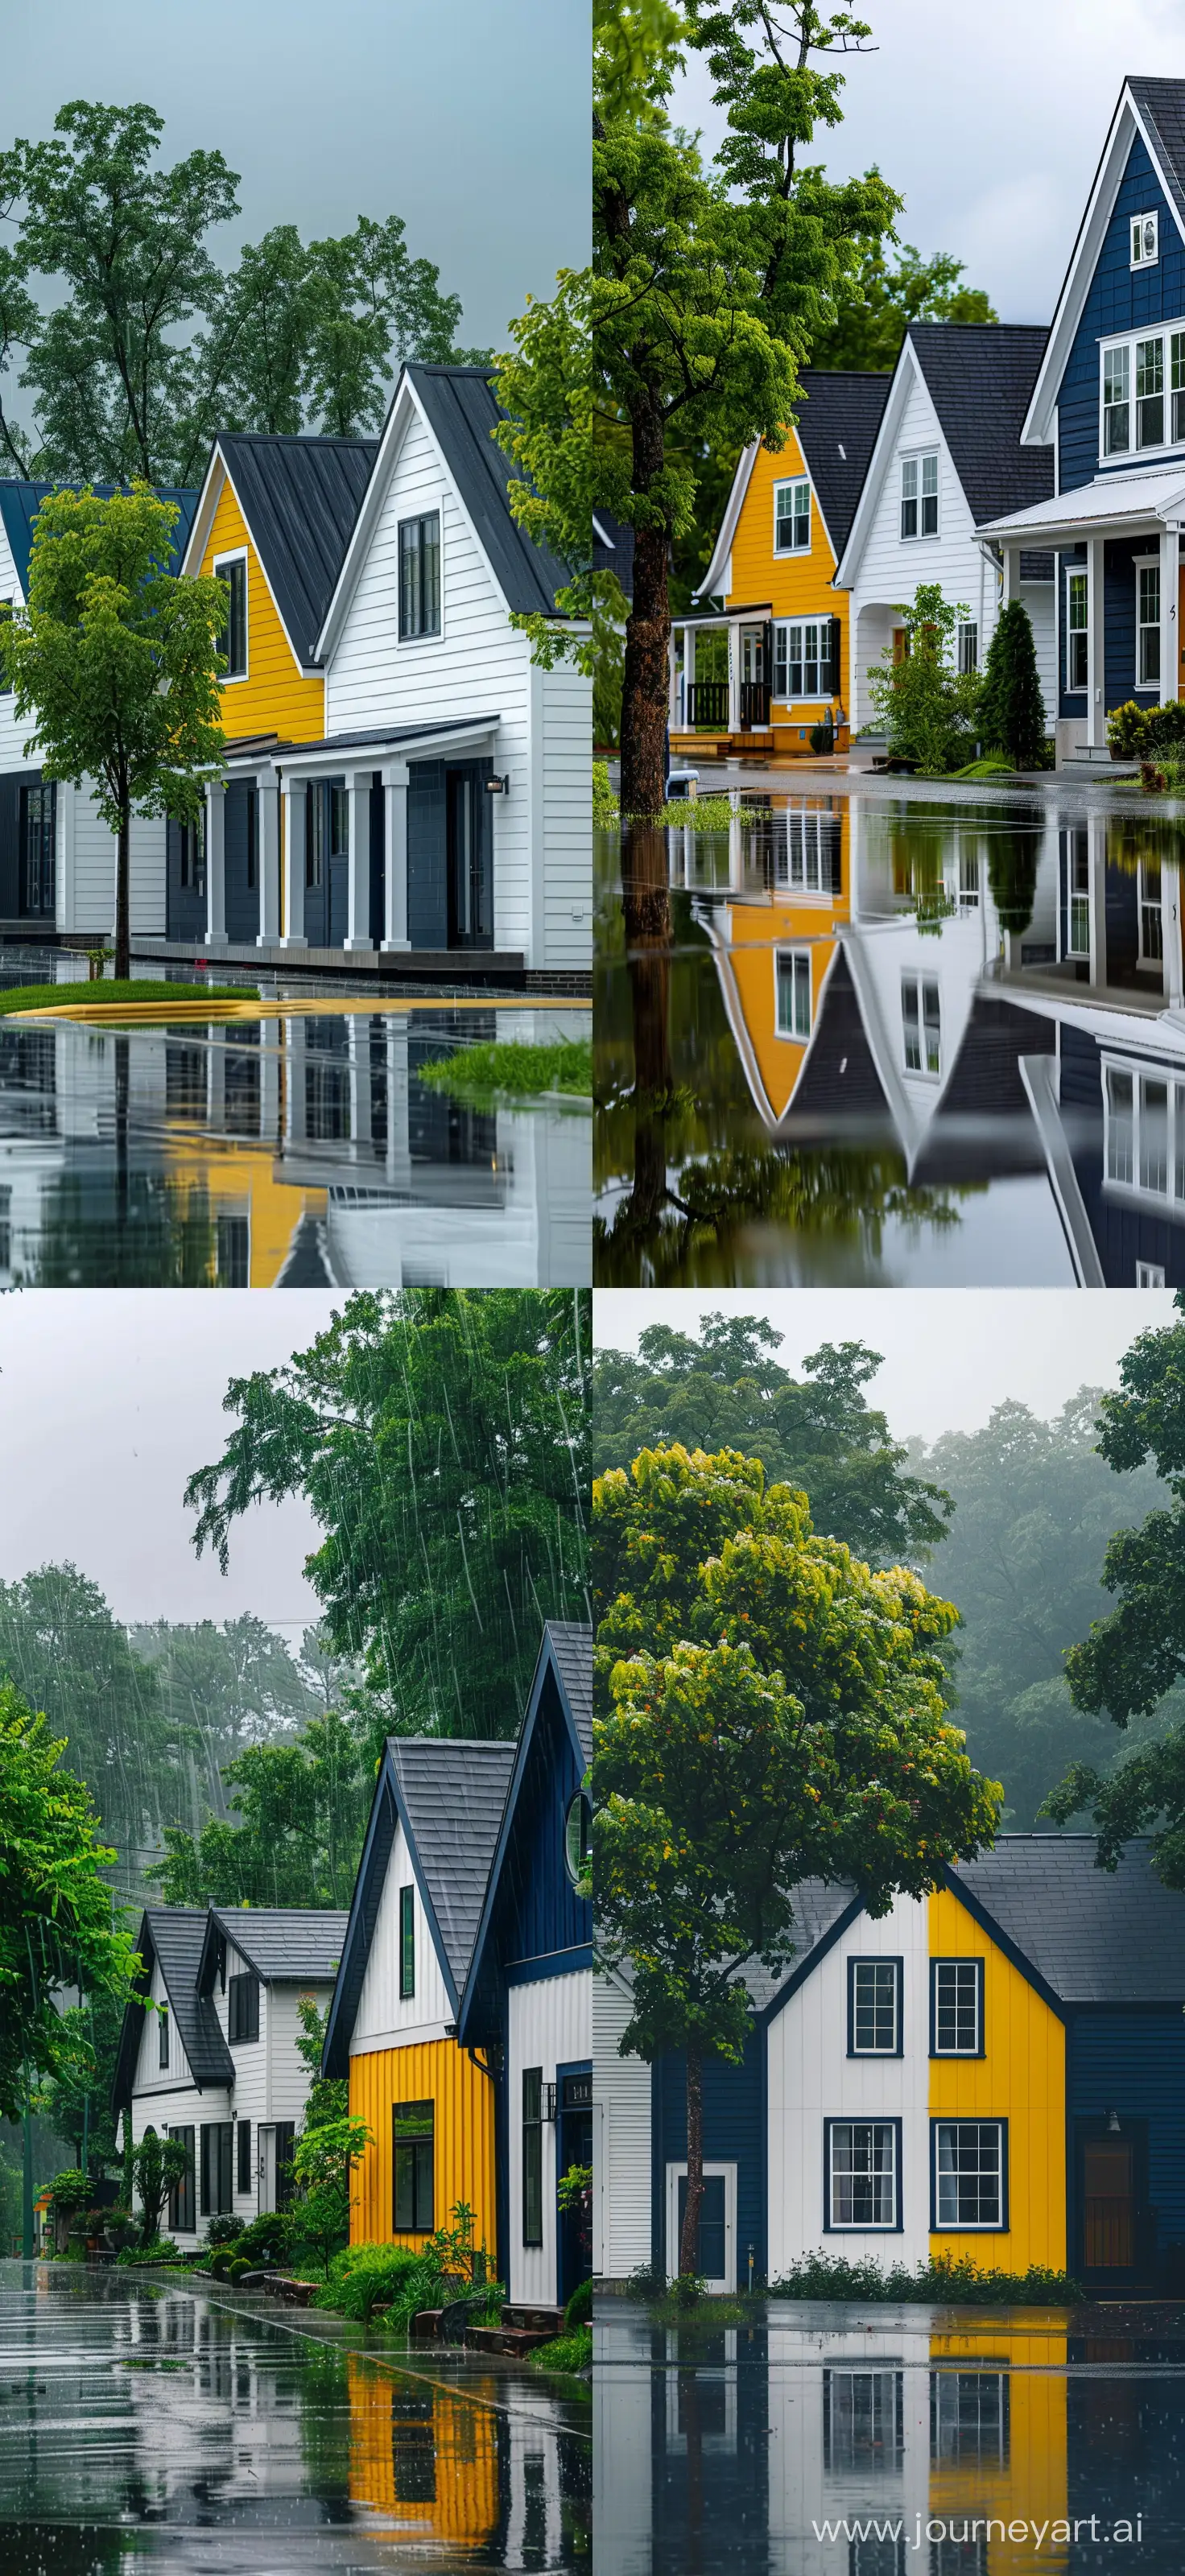 Modern-Gable-Houses-in-Rainy-Day-with-Dreamy-Atmosphere